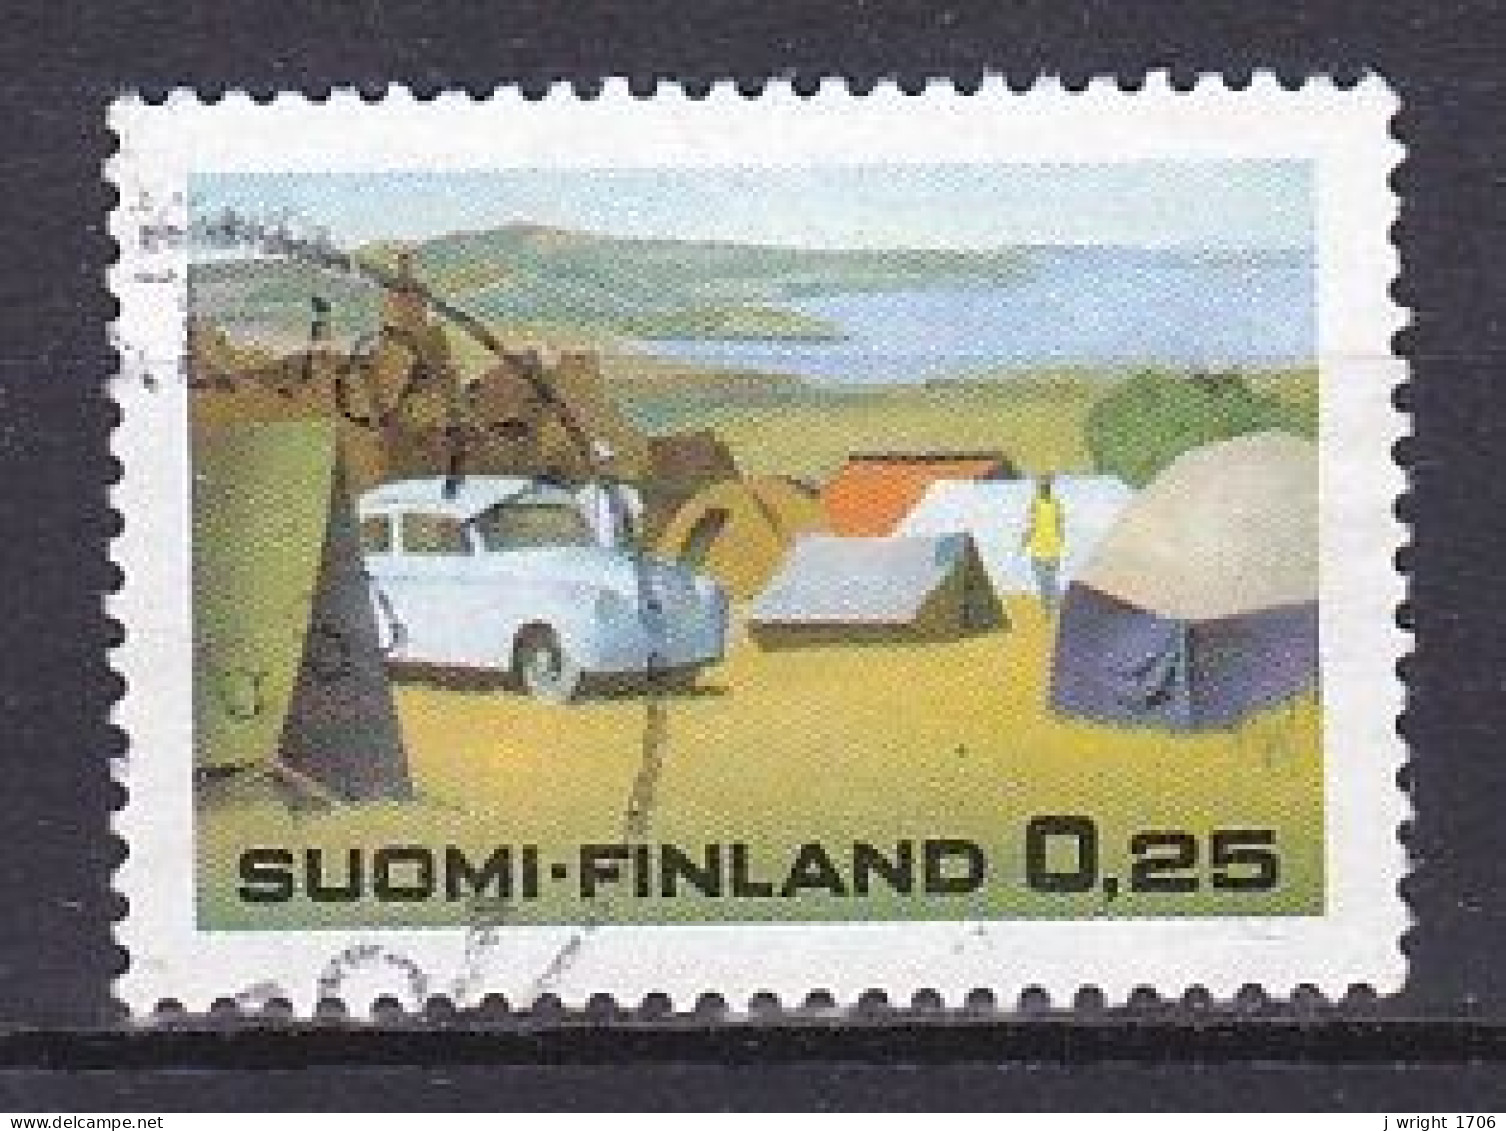 Finland, 1968, Summer Tourism, 0.25mk, USED - Used Stamps